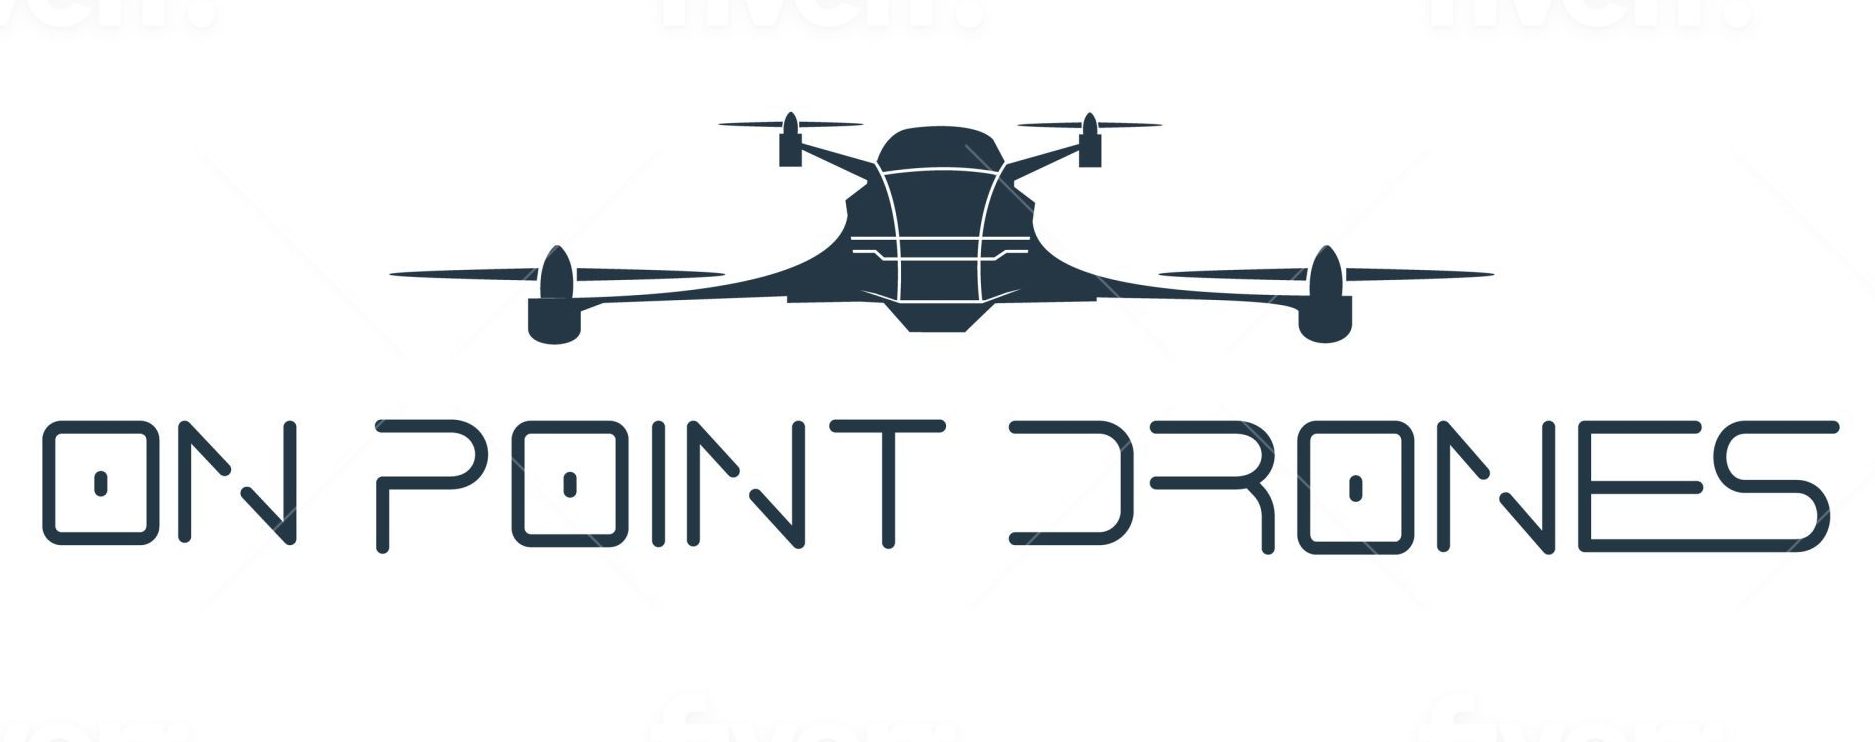 On Point Drones - Above the rest